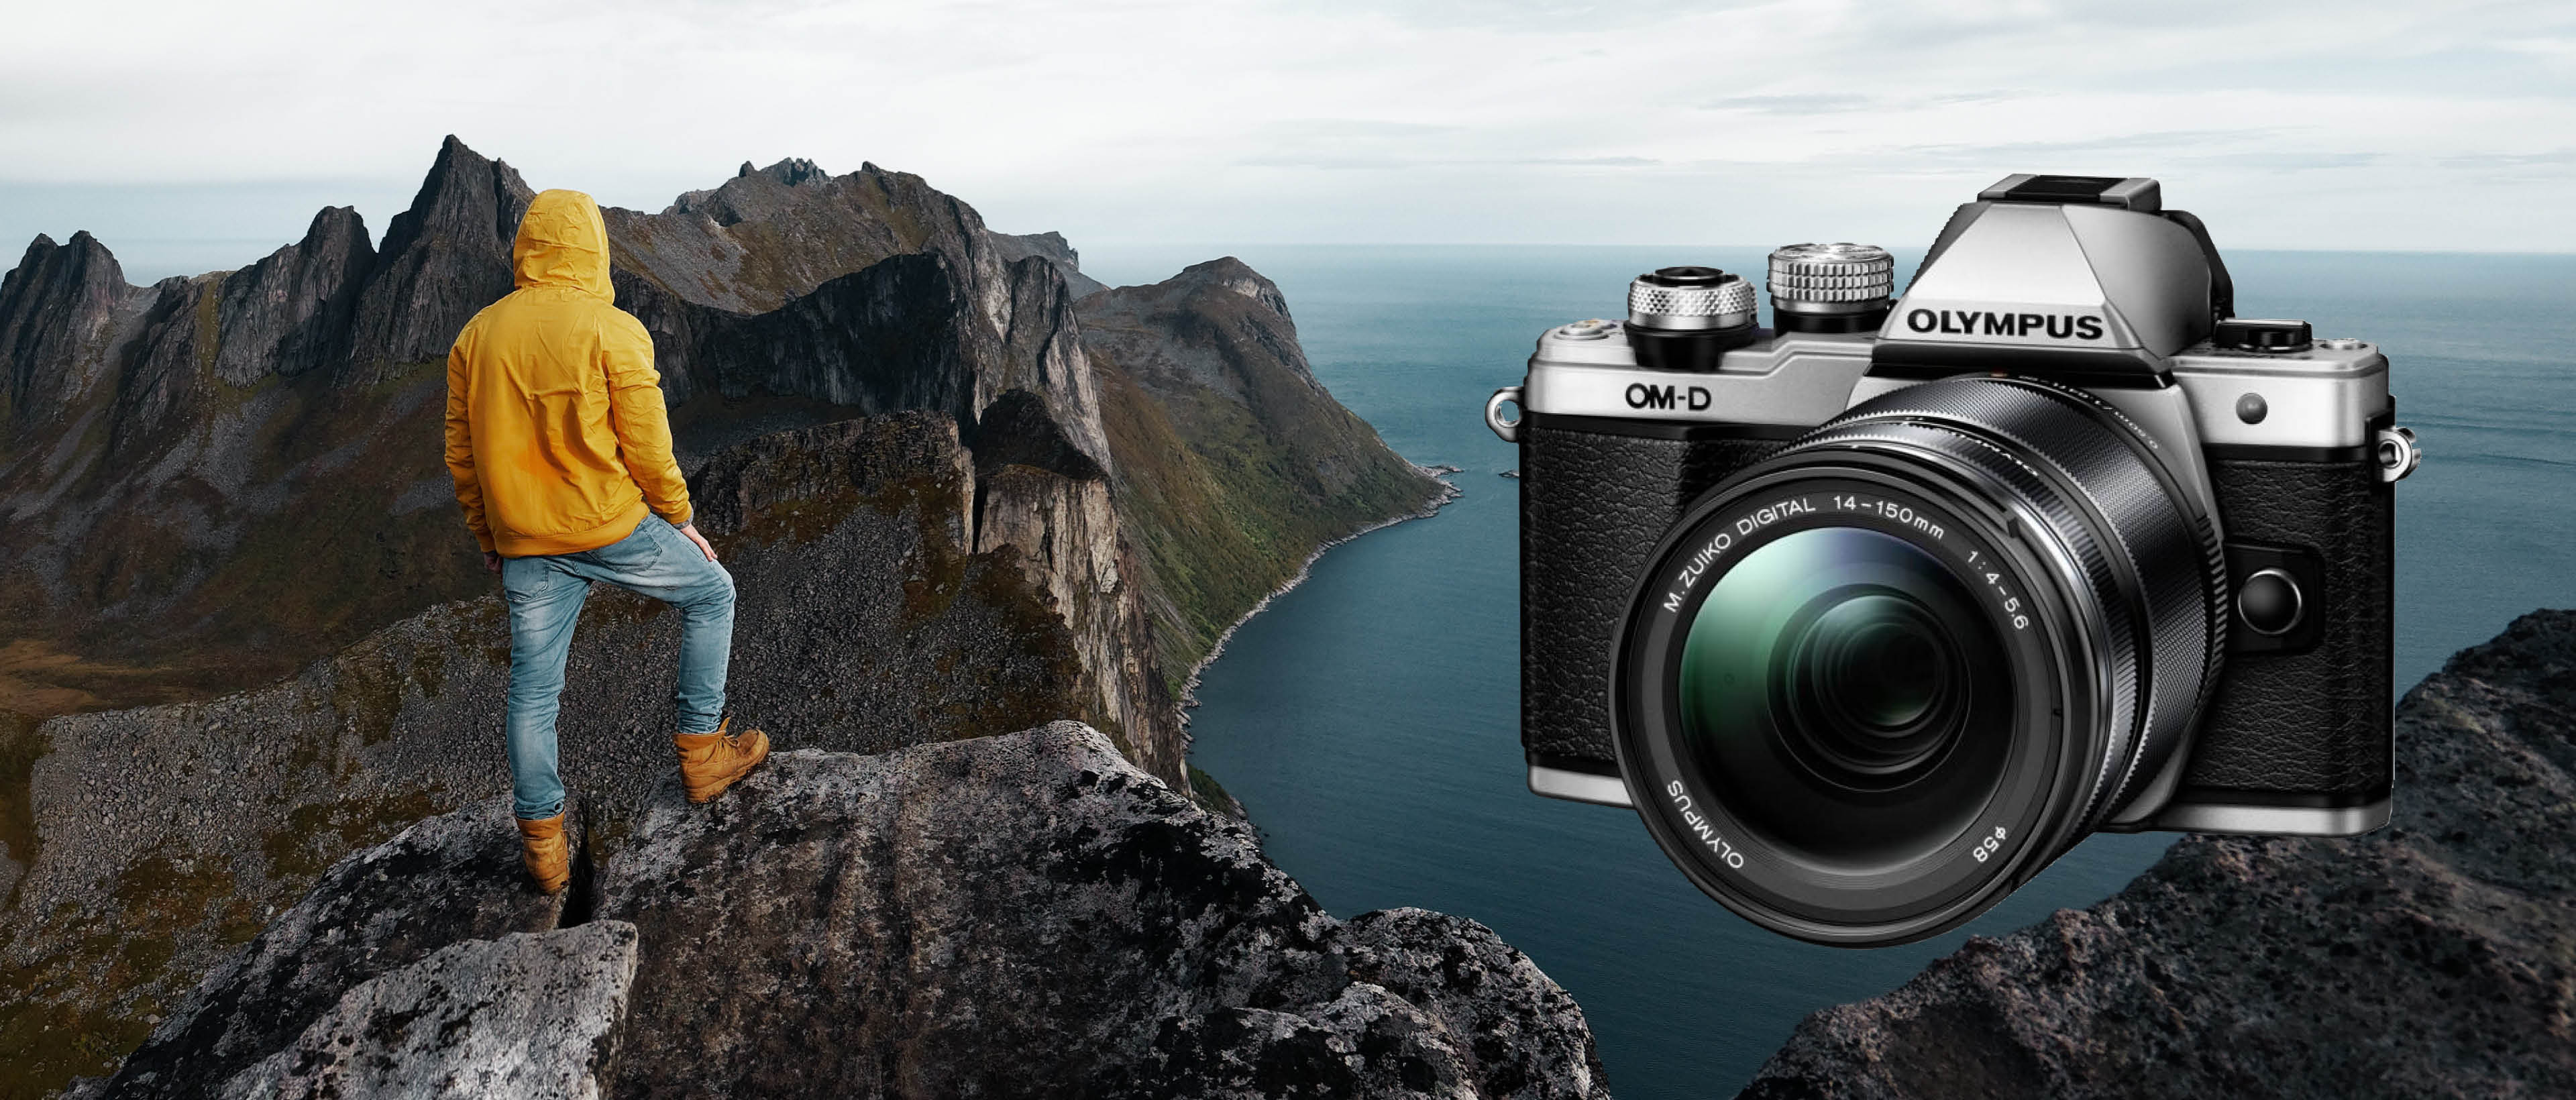 Preview Image: Olympus OM-D E-M1 Mark II Firmware Version 3.0